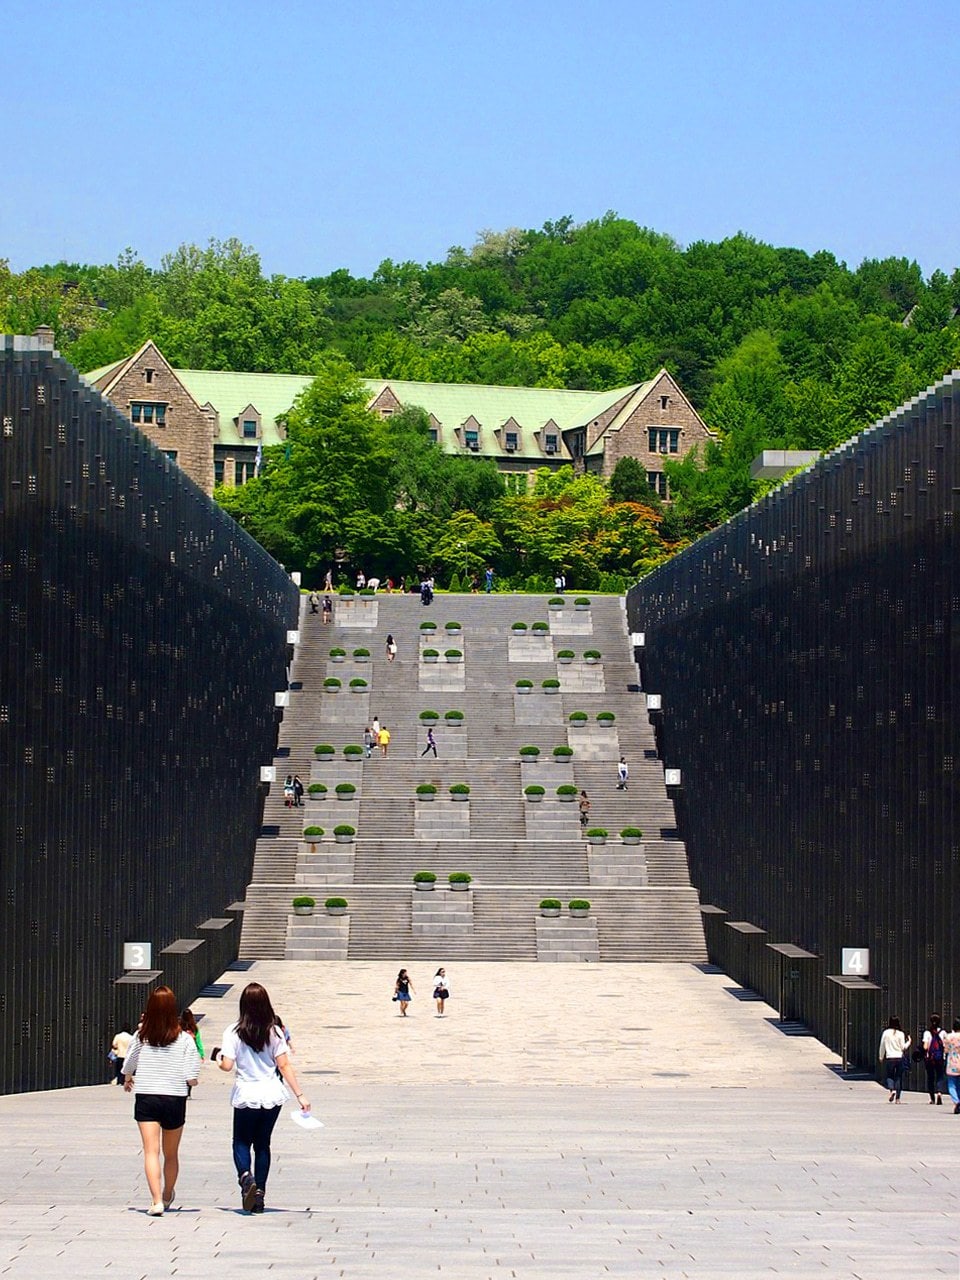 The amazing glass structure ECC at Ewha